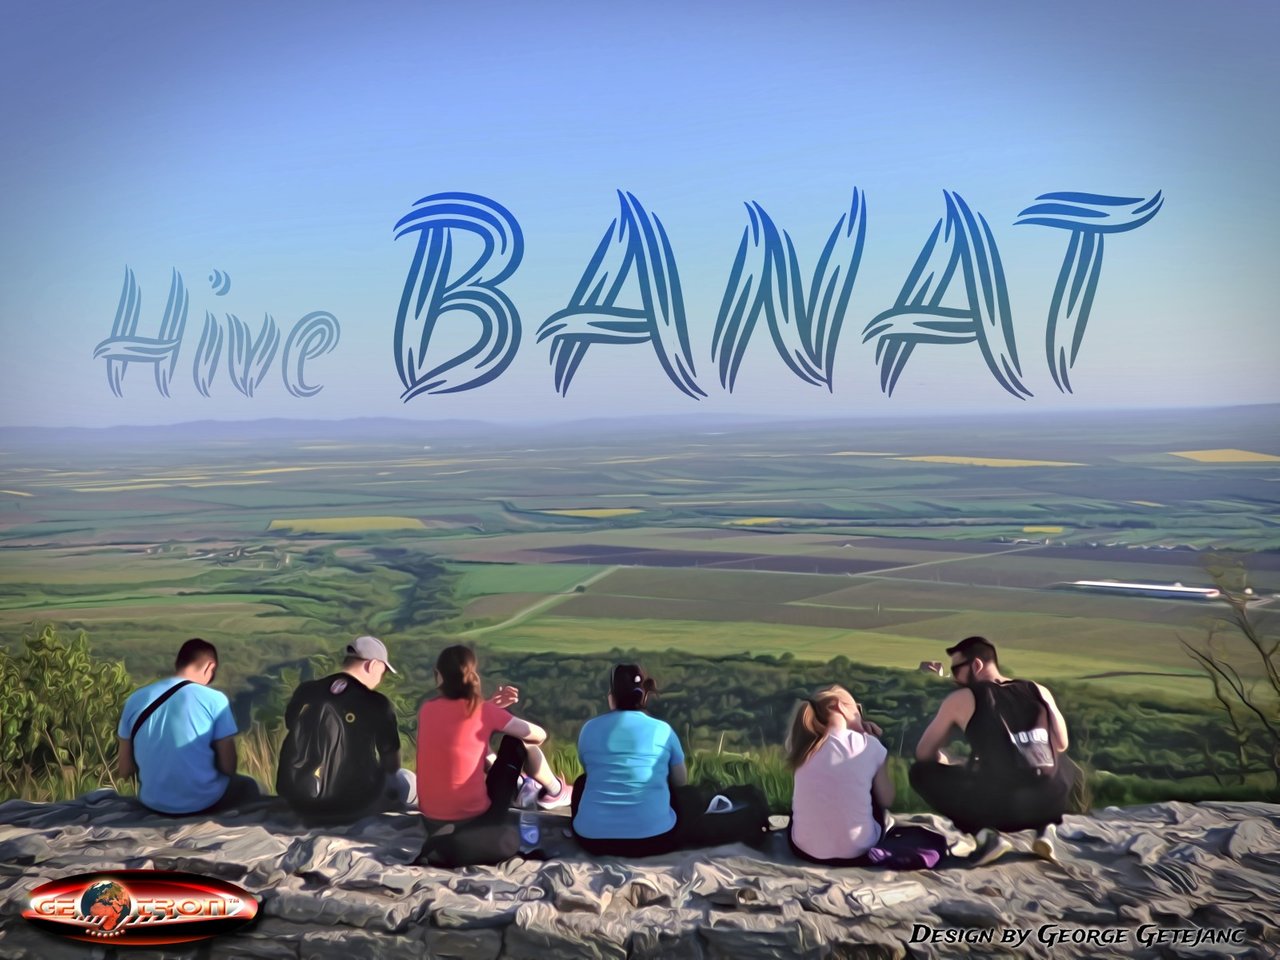 Welcome to the BANAT community